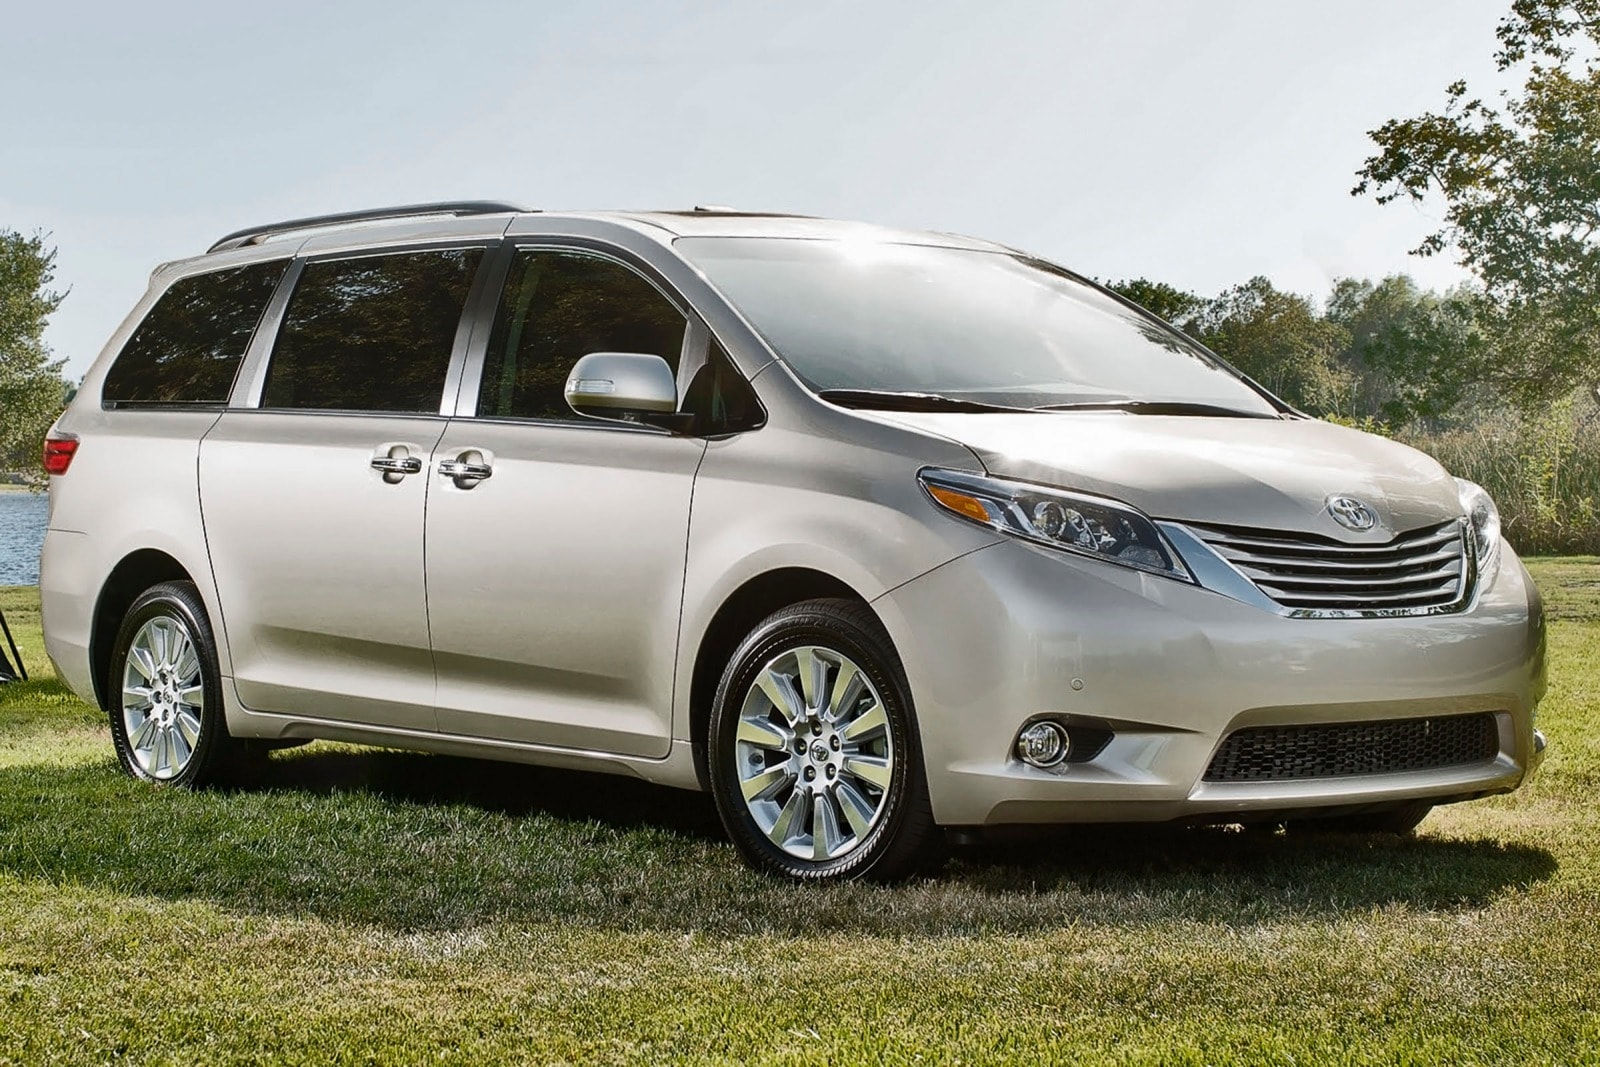 Uncovering the Top and Bottom Toyota Sienna Model Years